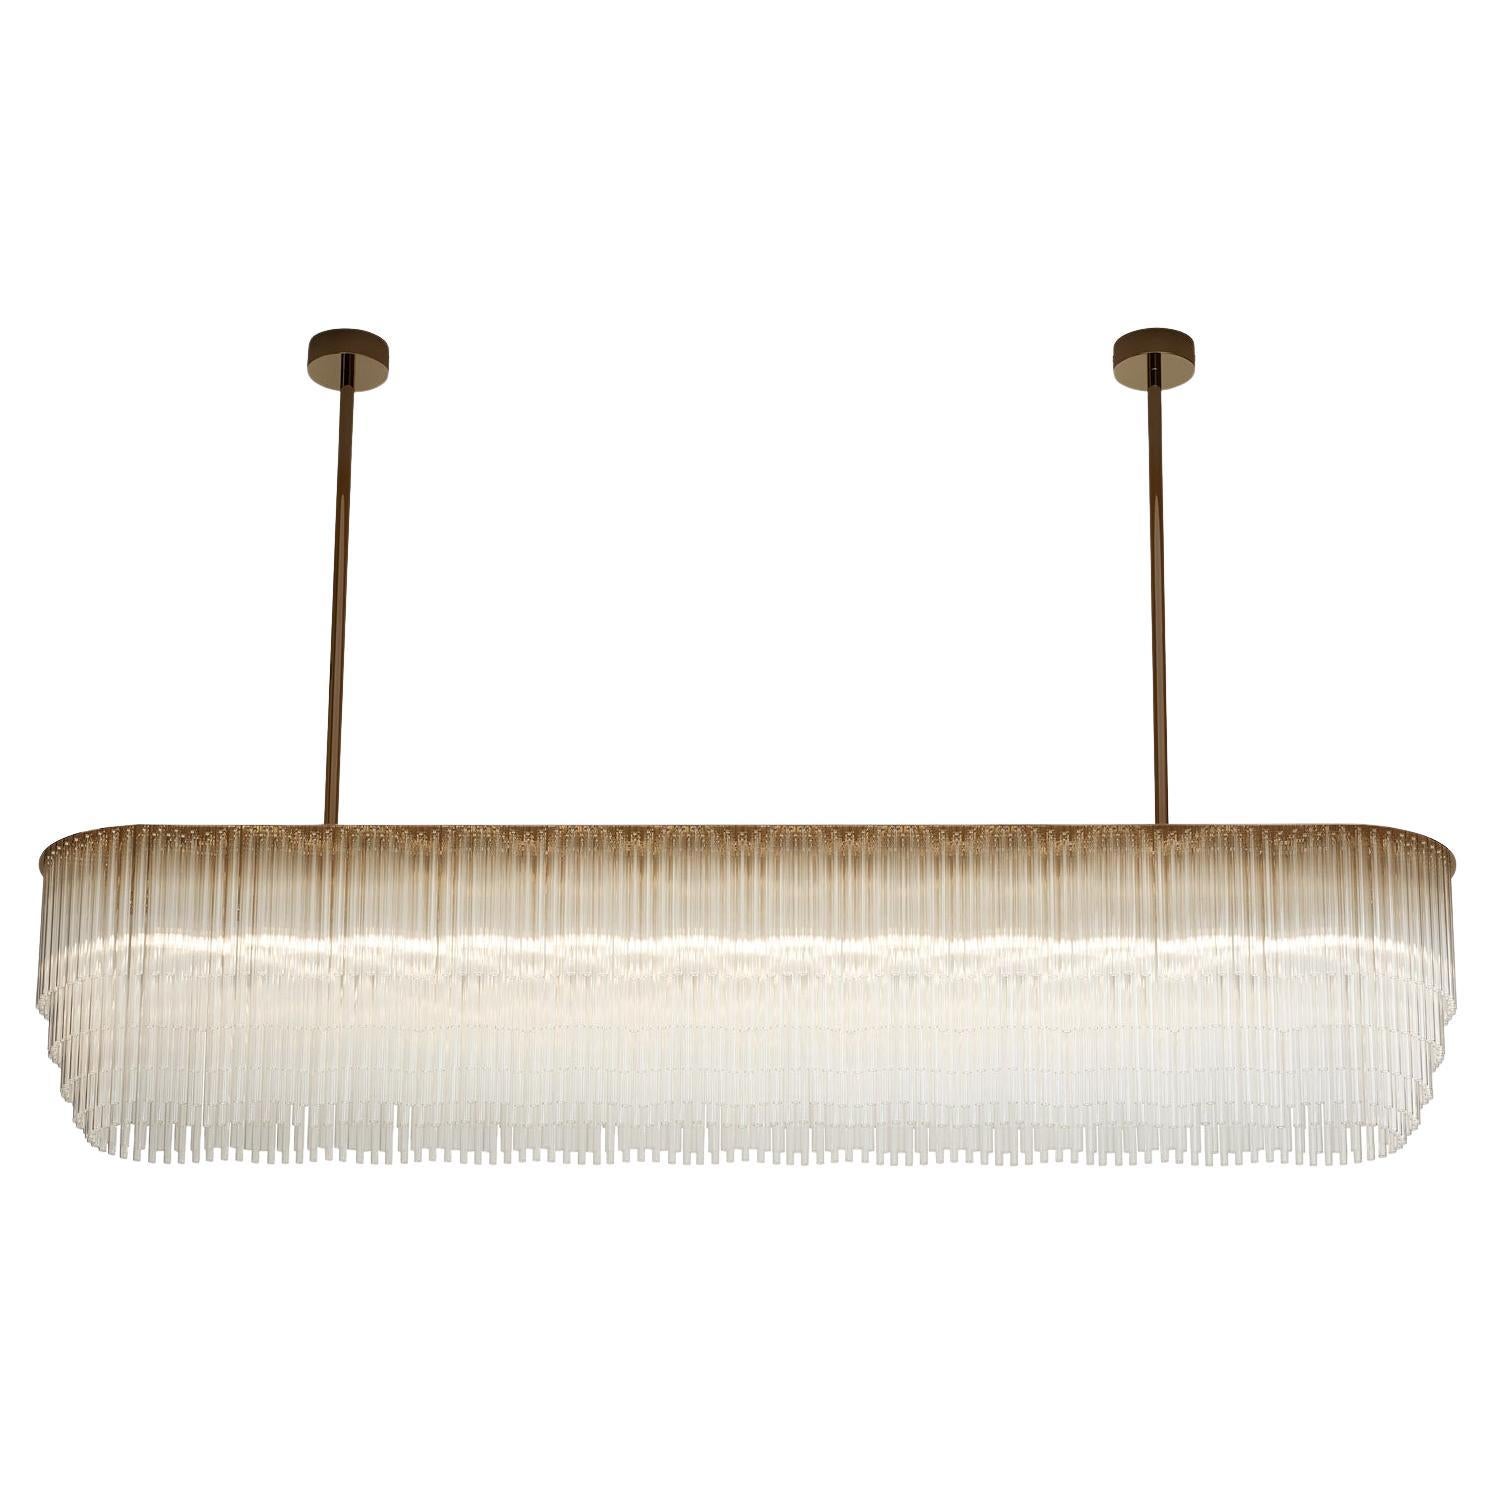 Linear Chandelier 1697mm / 66.75" in Brass-based Bronze and Tiered Glass Profile For Sale